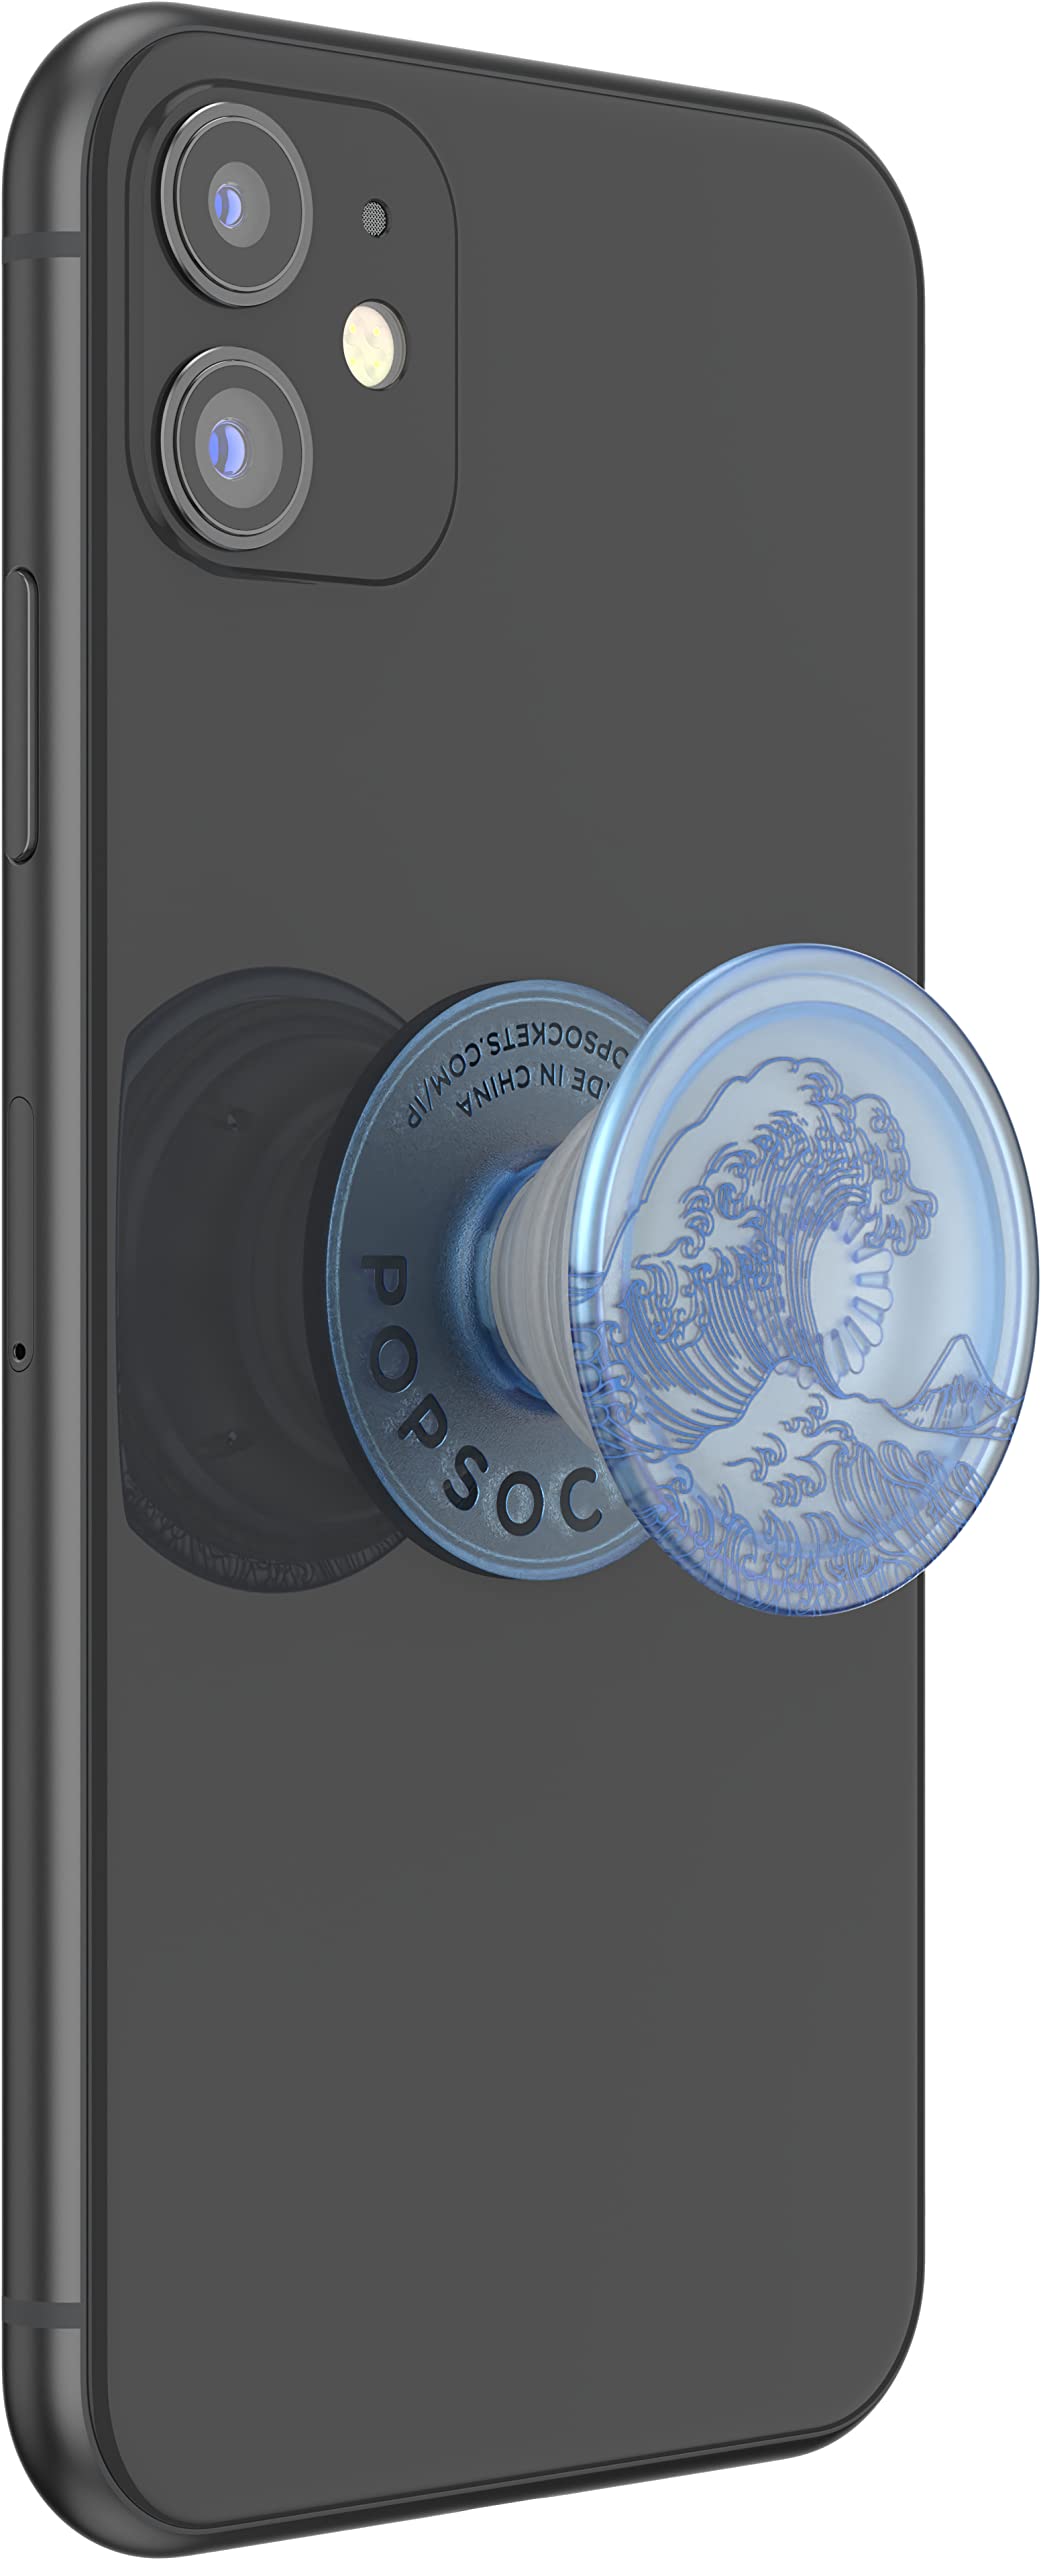 PopSockets Plant-Based Phone Grip with Expanding Kickstand, Eco-Friendly PopSockets for Phone -Translucent Ocean